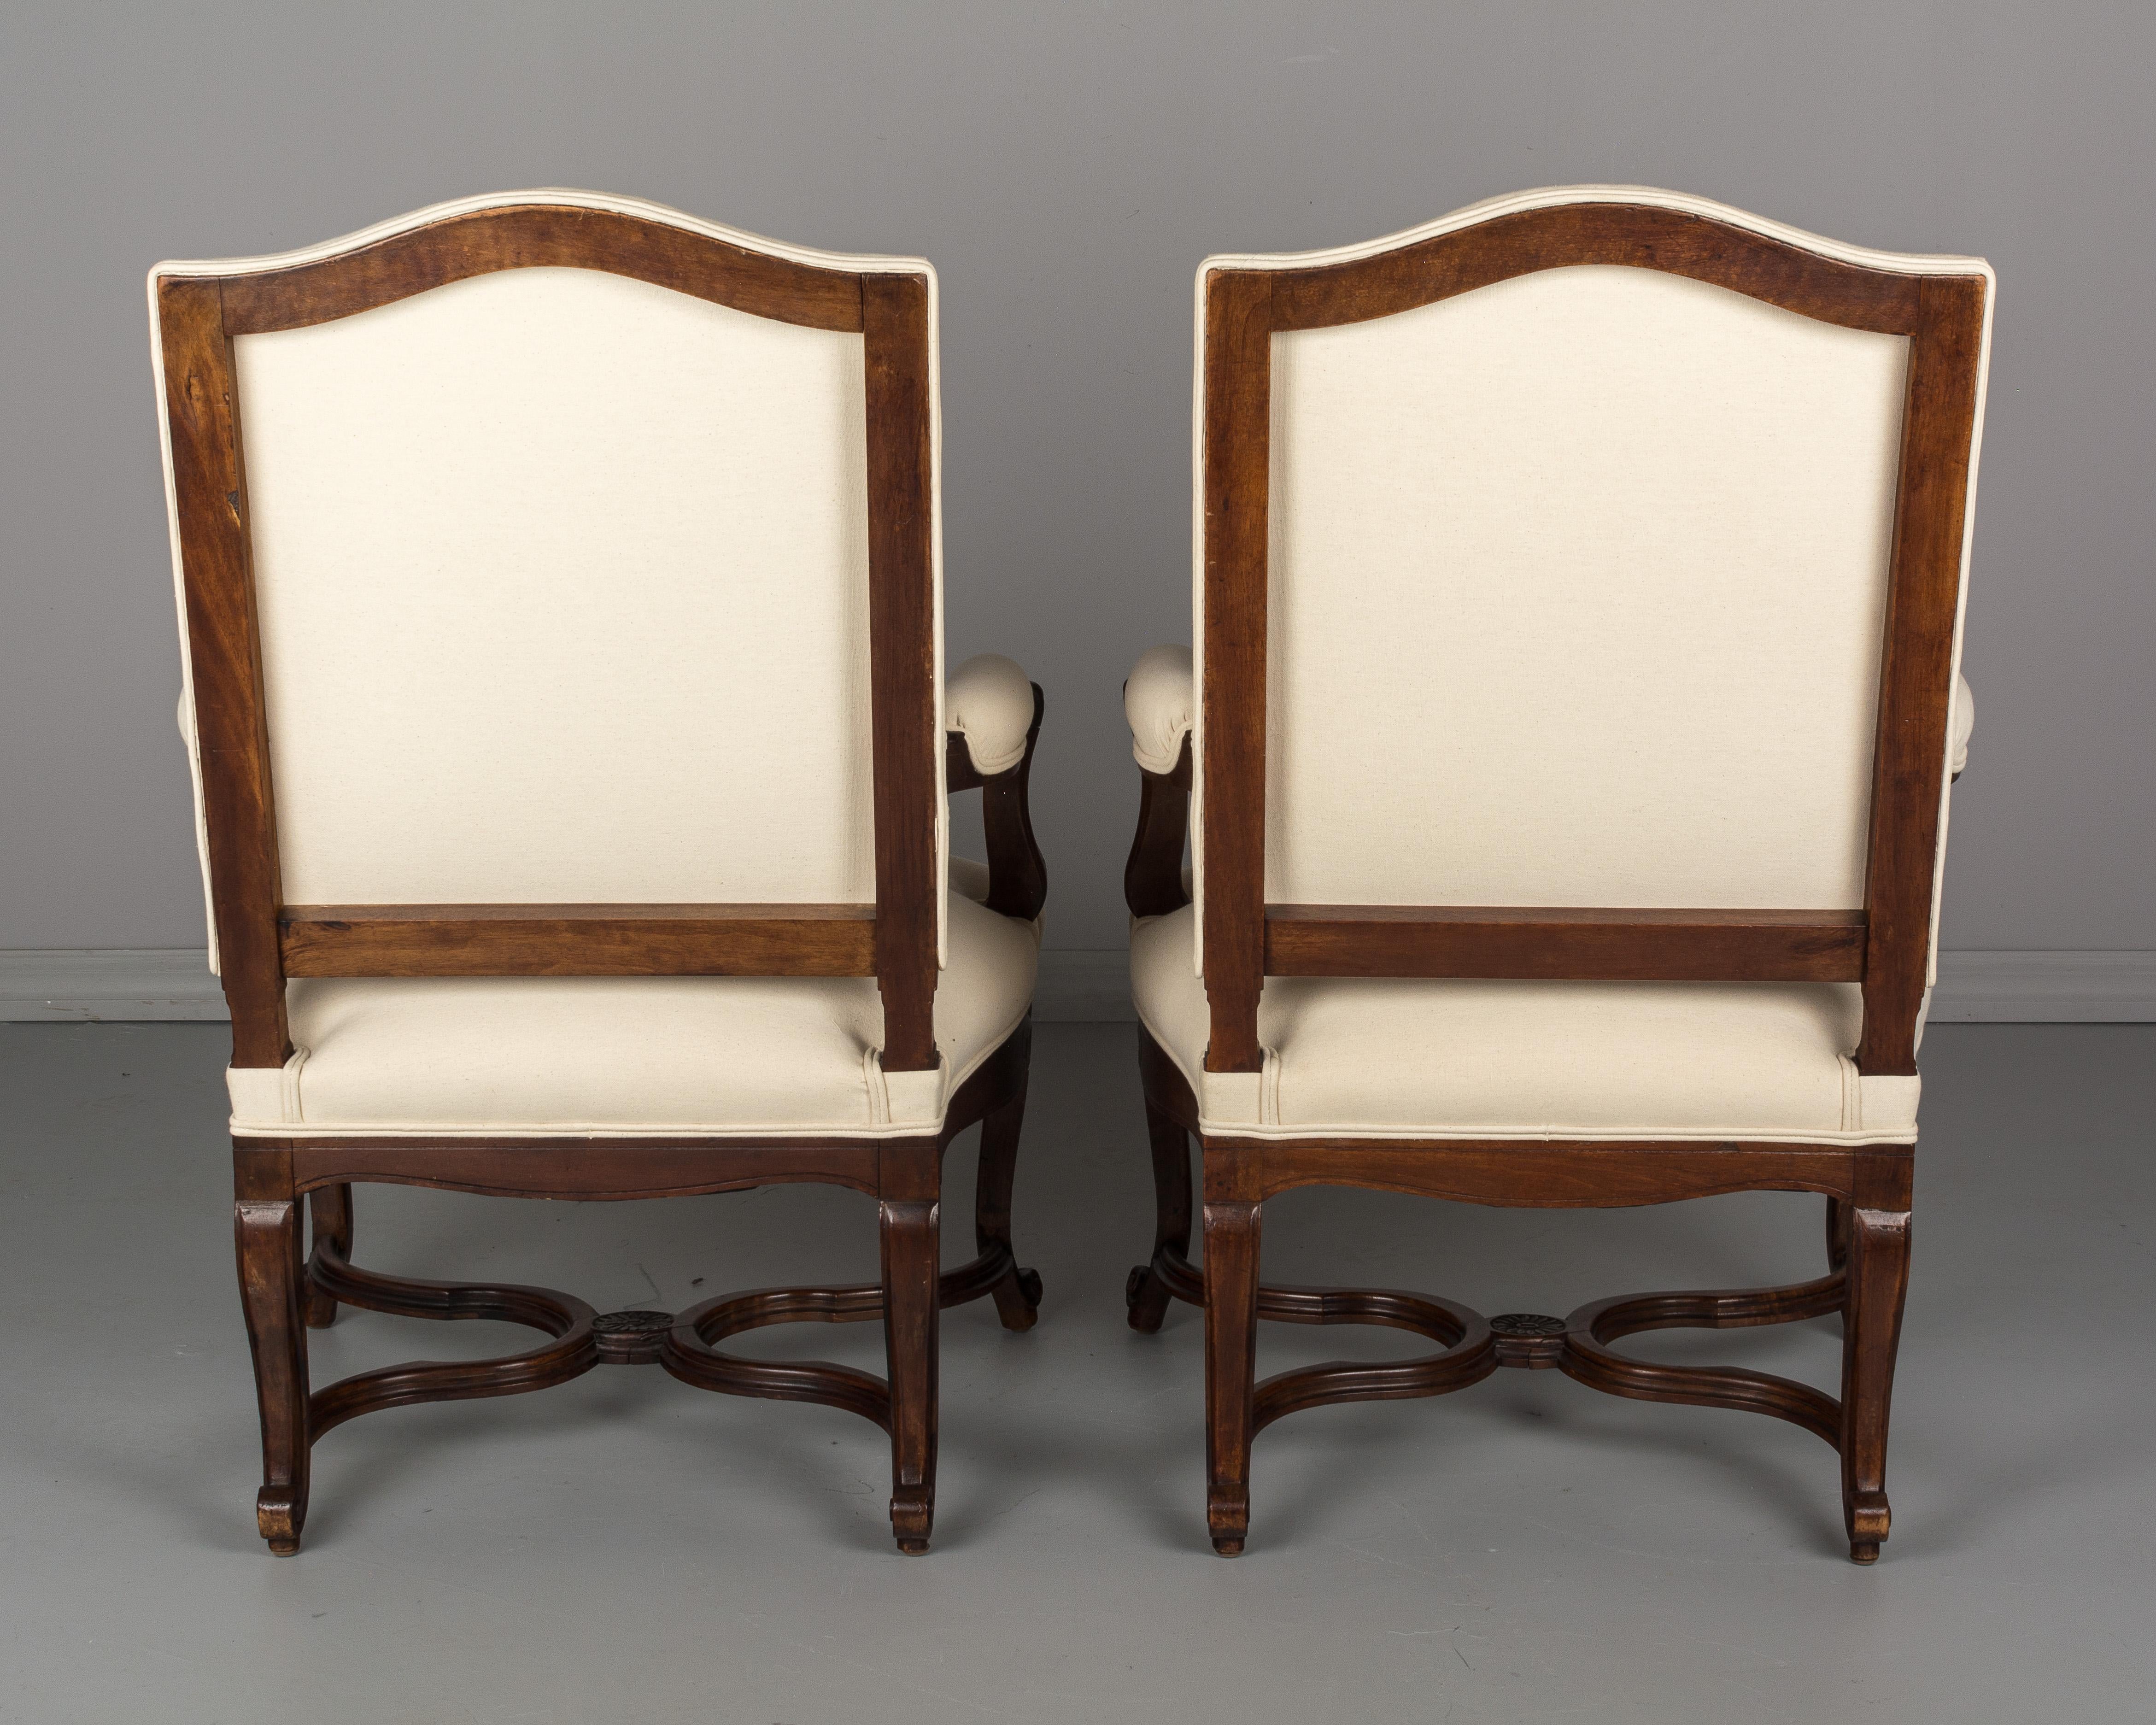 Walnut Pair of French Regency Style Fauteuils or Armchairs